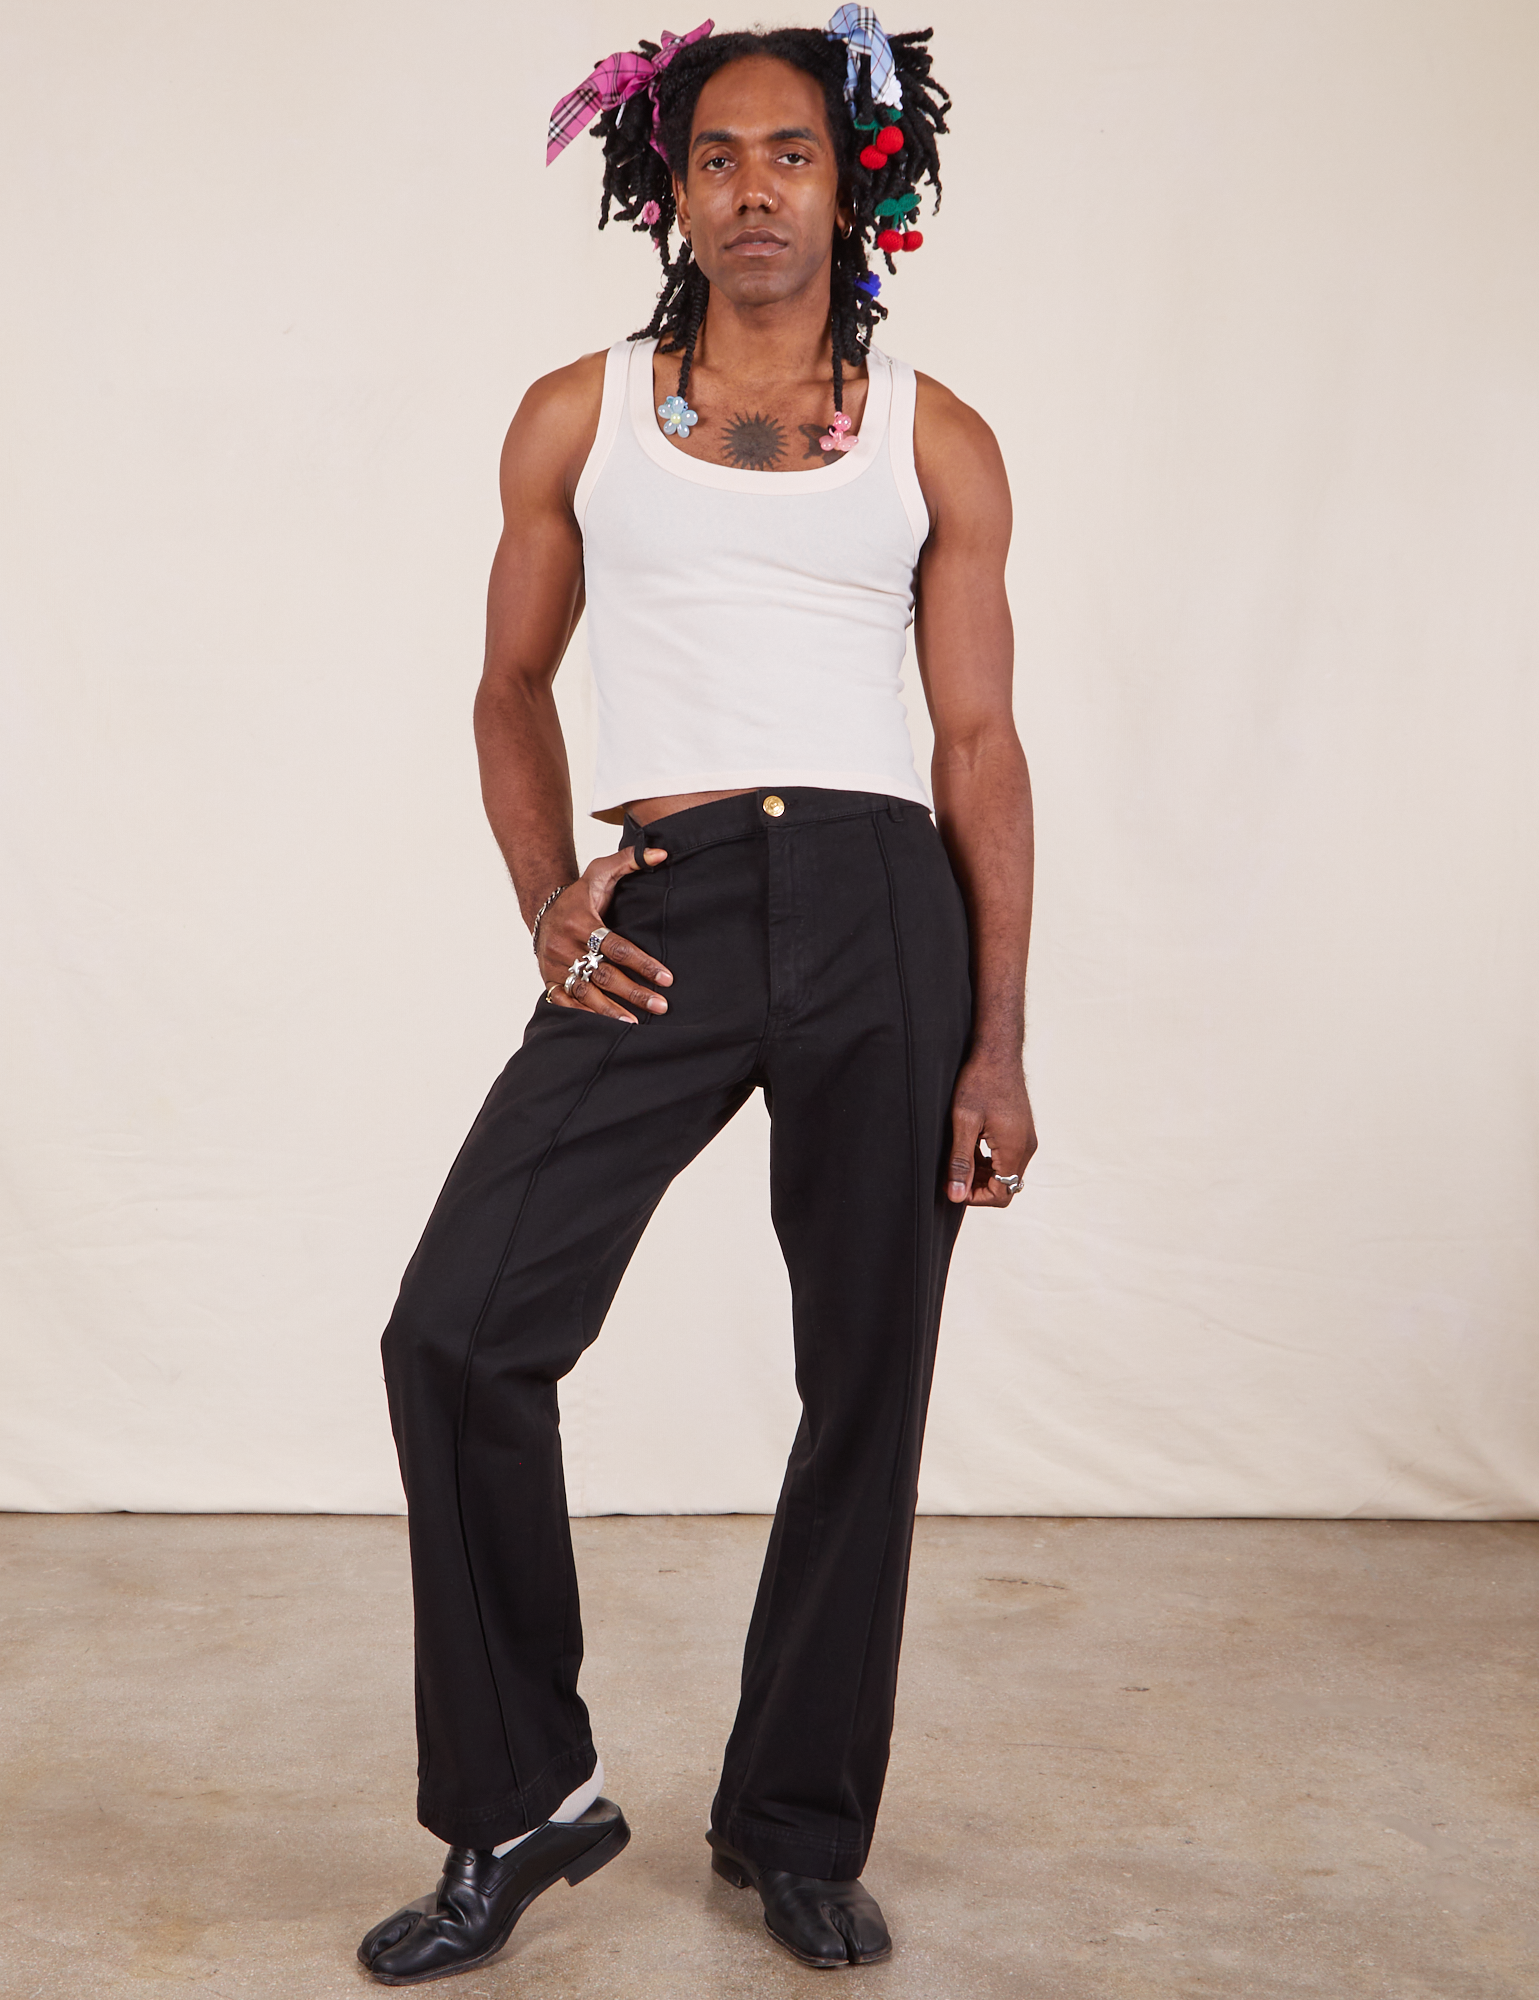 Jerrod is 6&#39;3&quot; and wearing M Long Western Pants in Basic Black paired with vintage off-white Tank Top